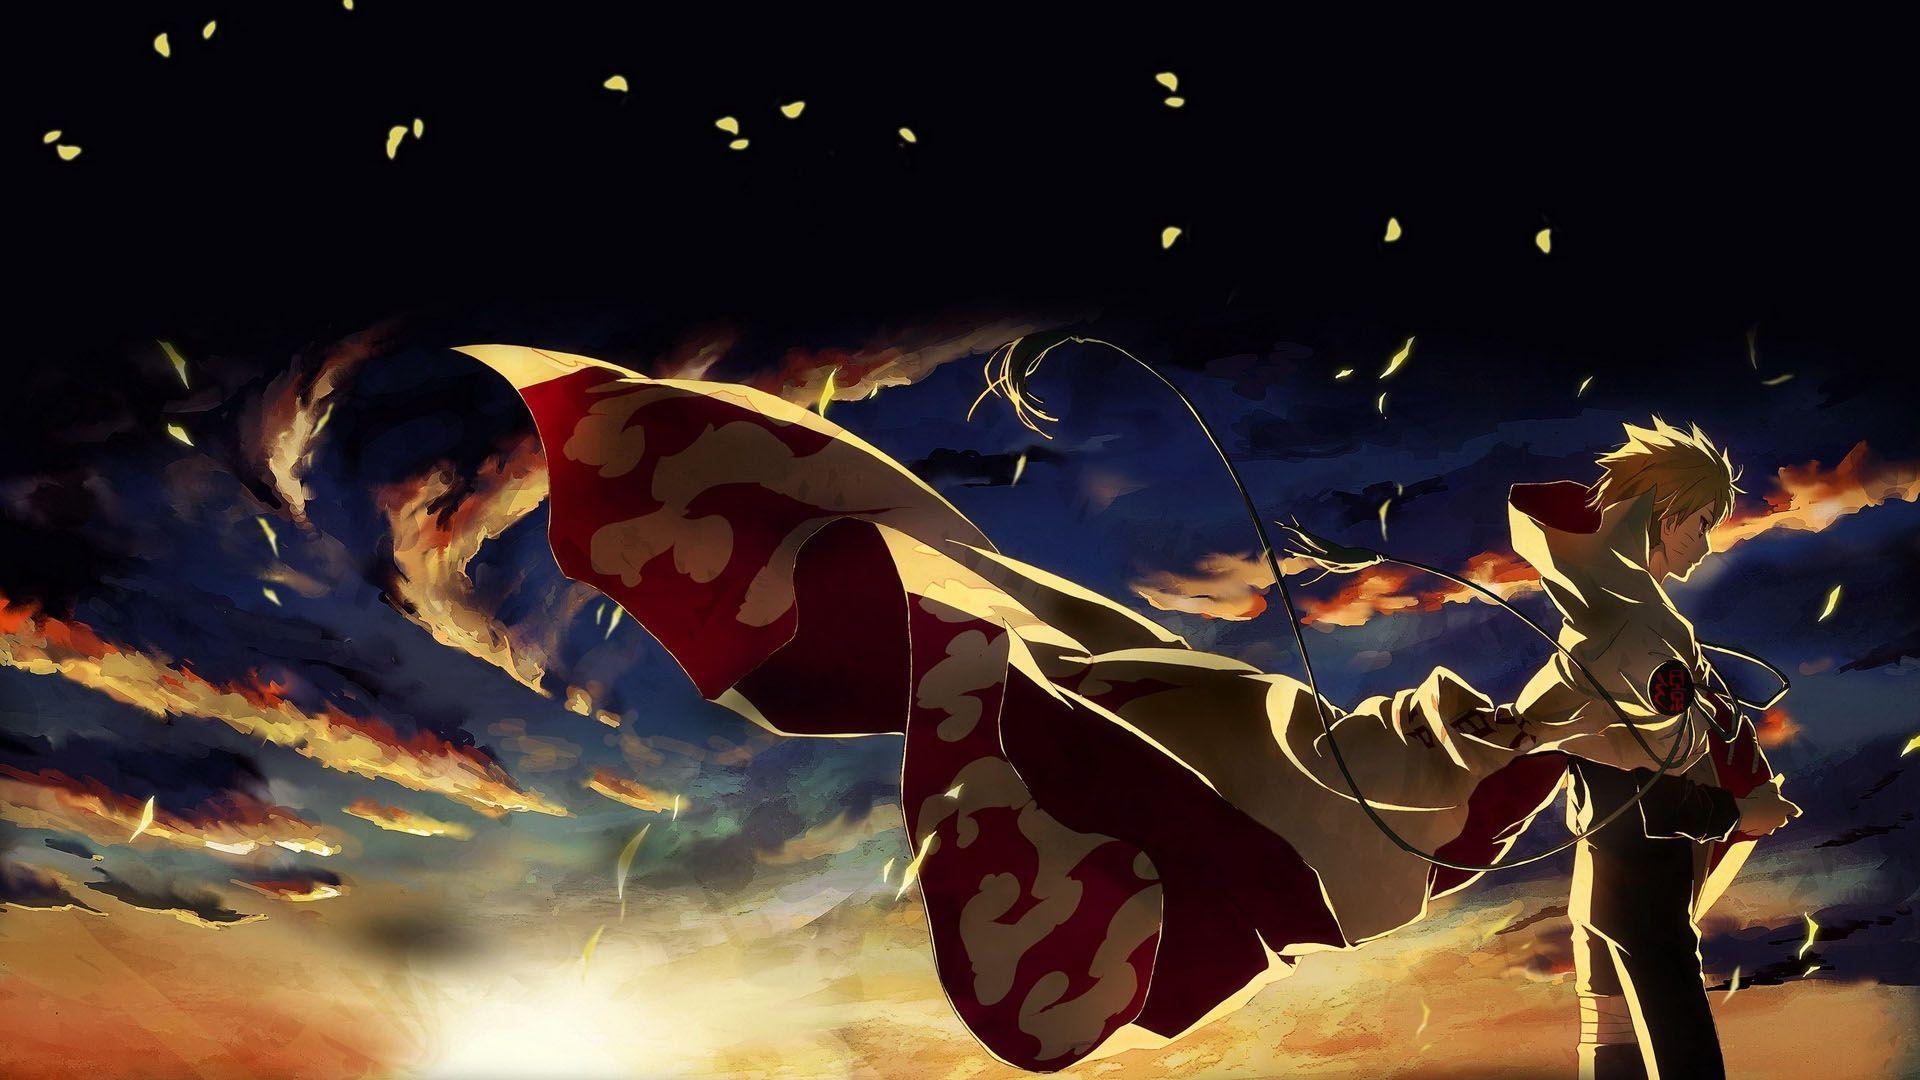 Cool Anime Wallpapers HD - Wallpaper Cave